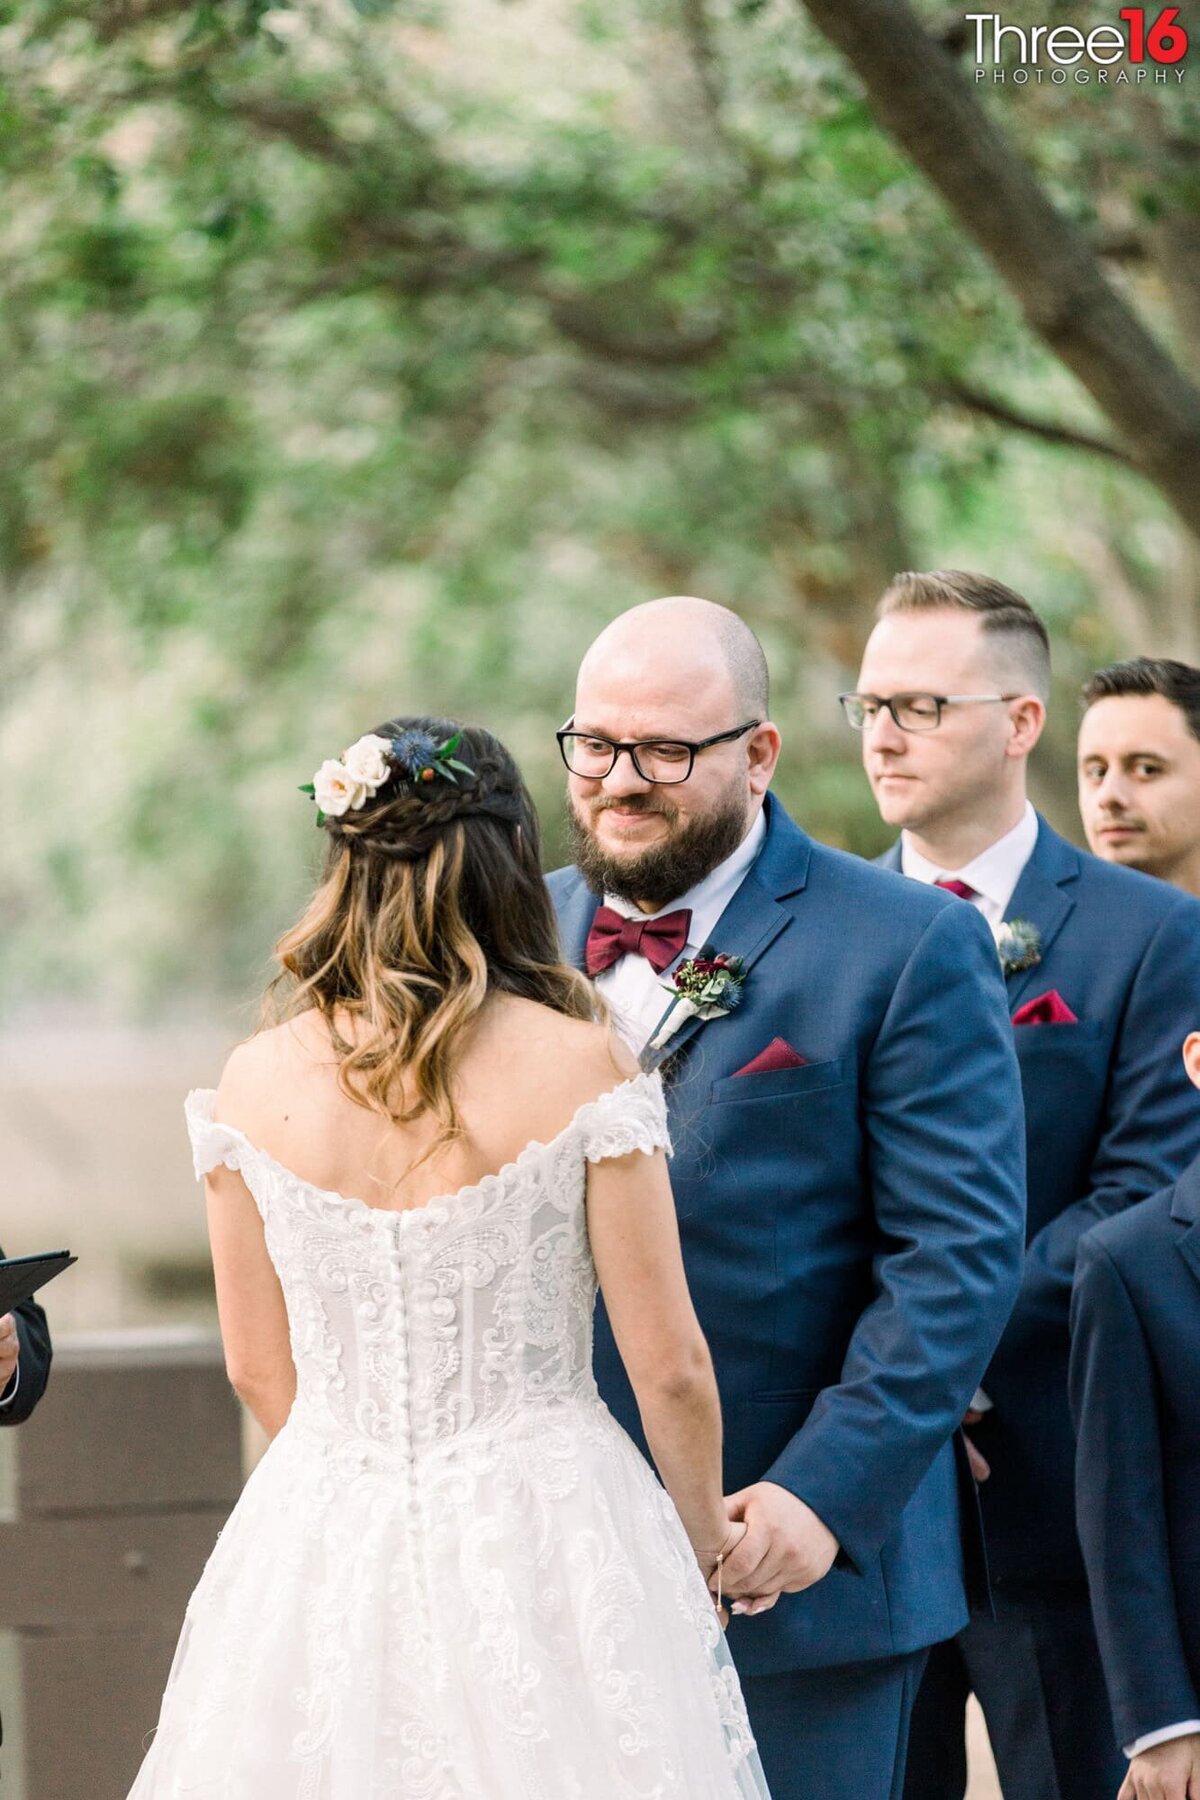 Groom smiles at his Bride as they take their vows